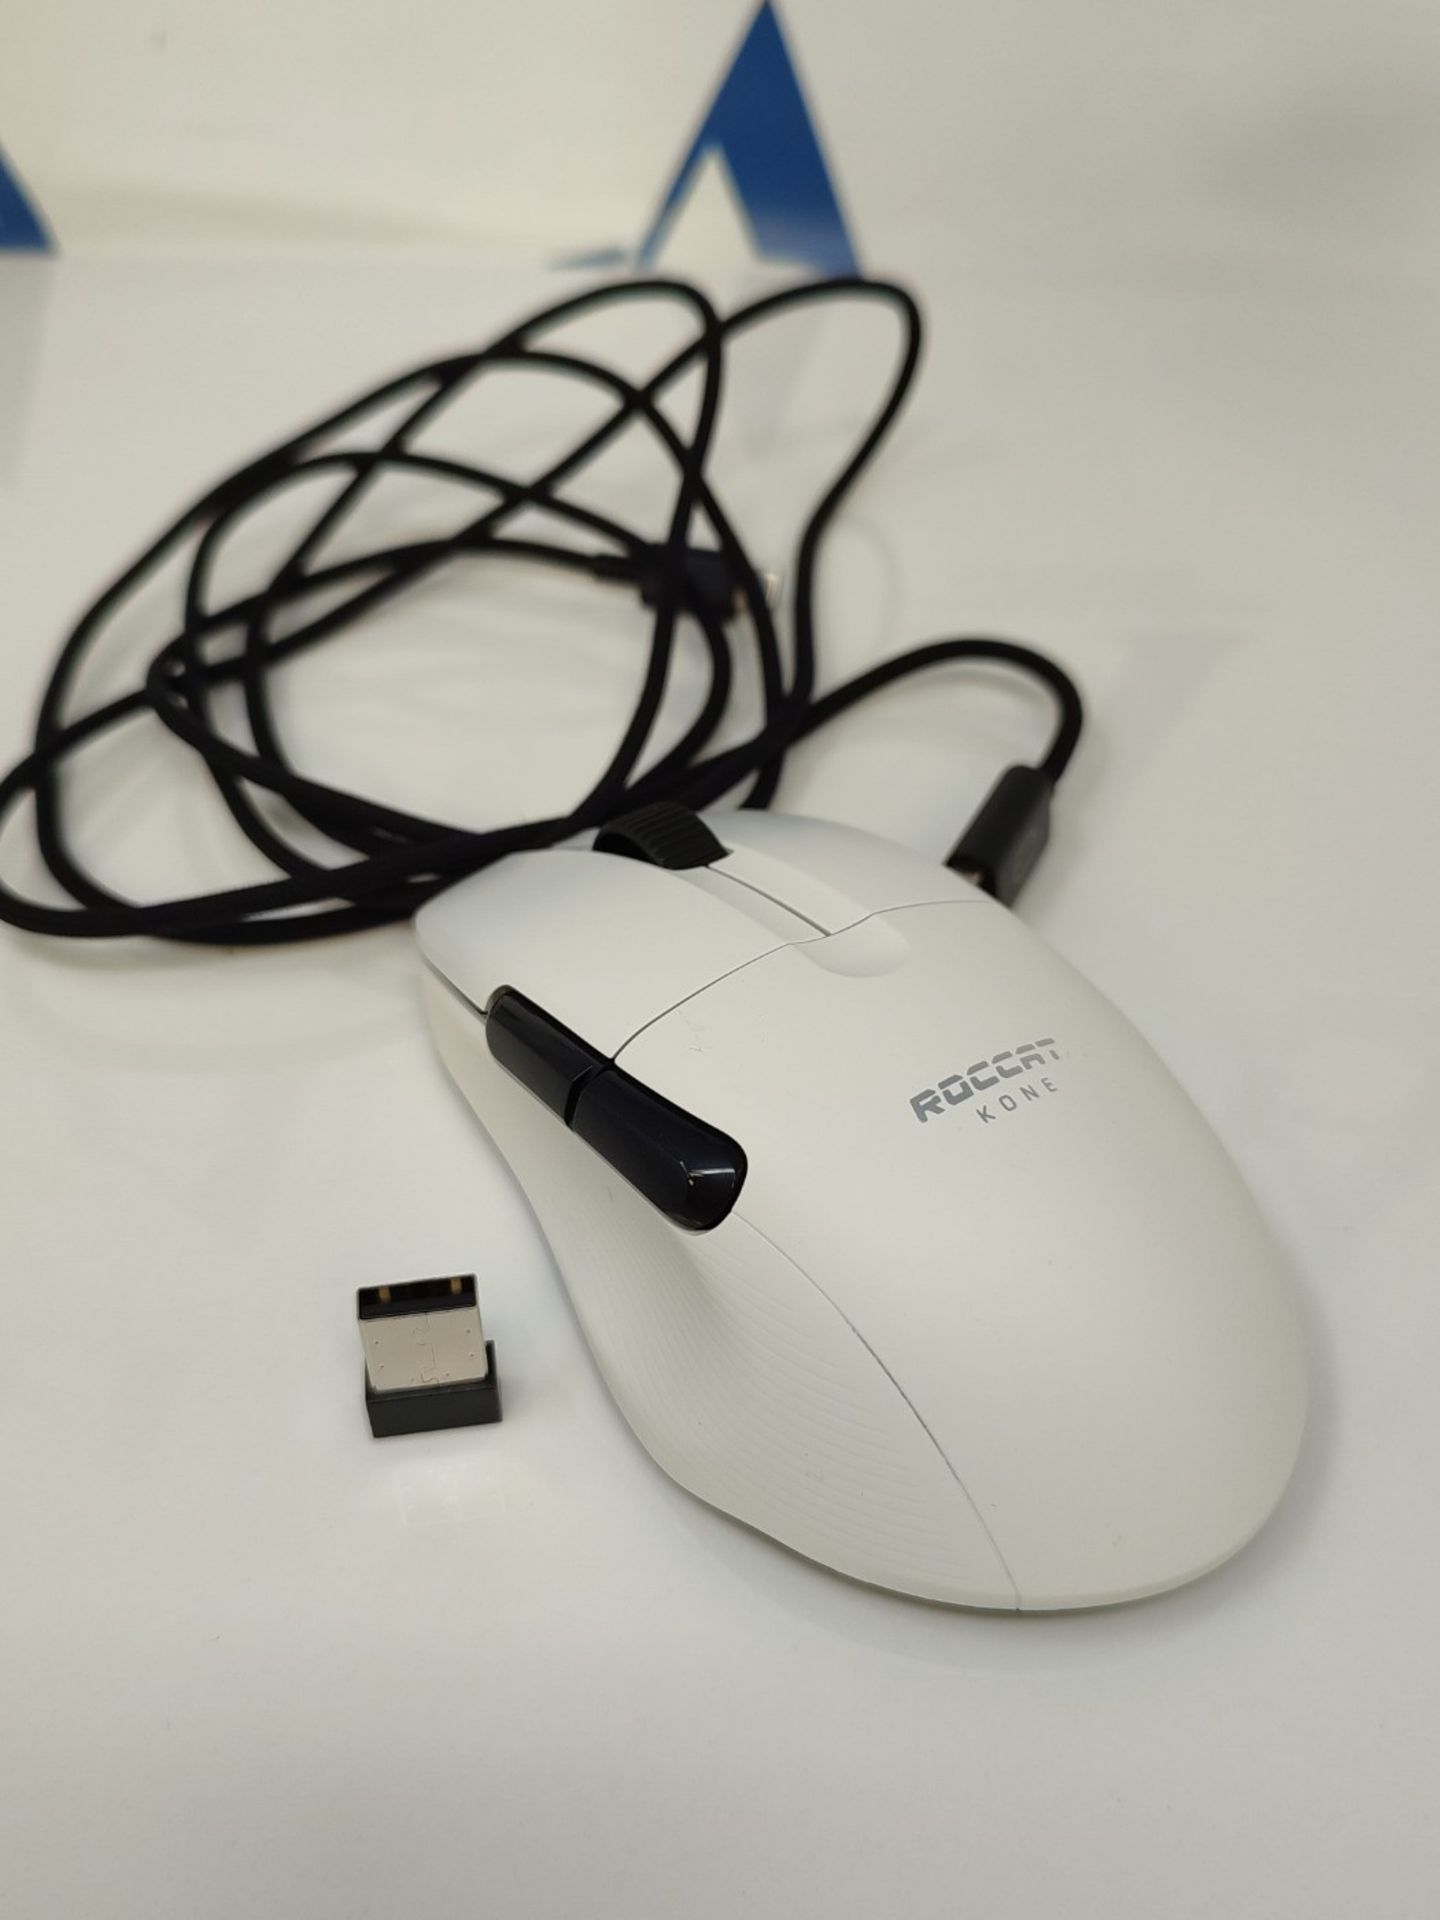 RRP £69.00 ROCCAT Kone Pro Air Ergonomic High-Performance Wireless Gaming Mouse, White - Image 3 of 3